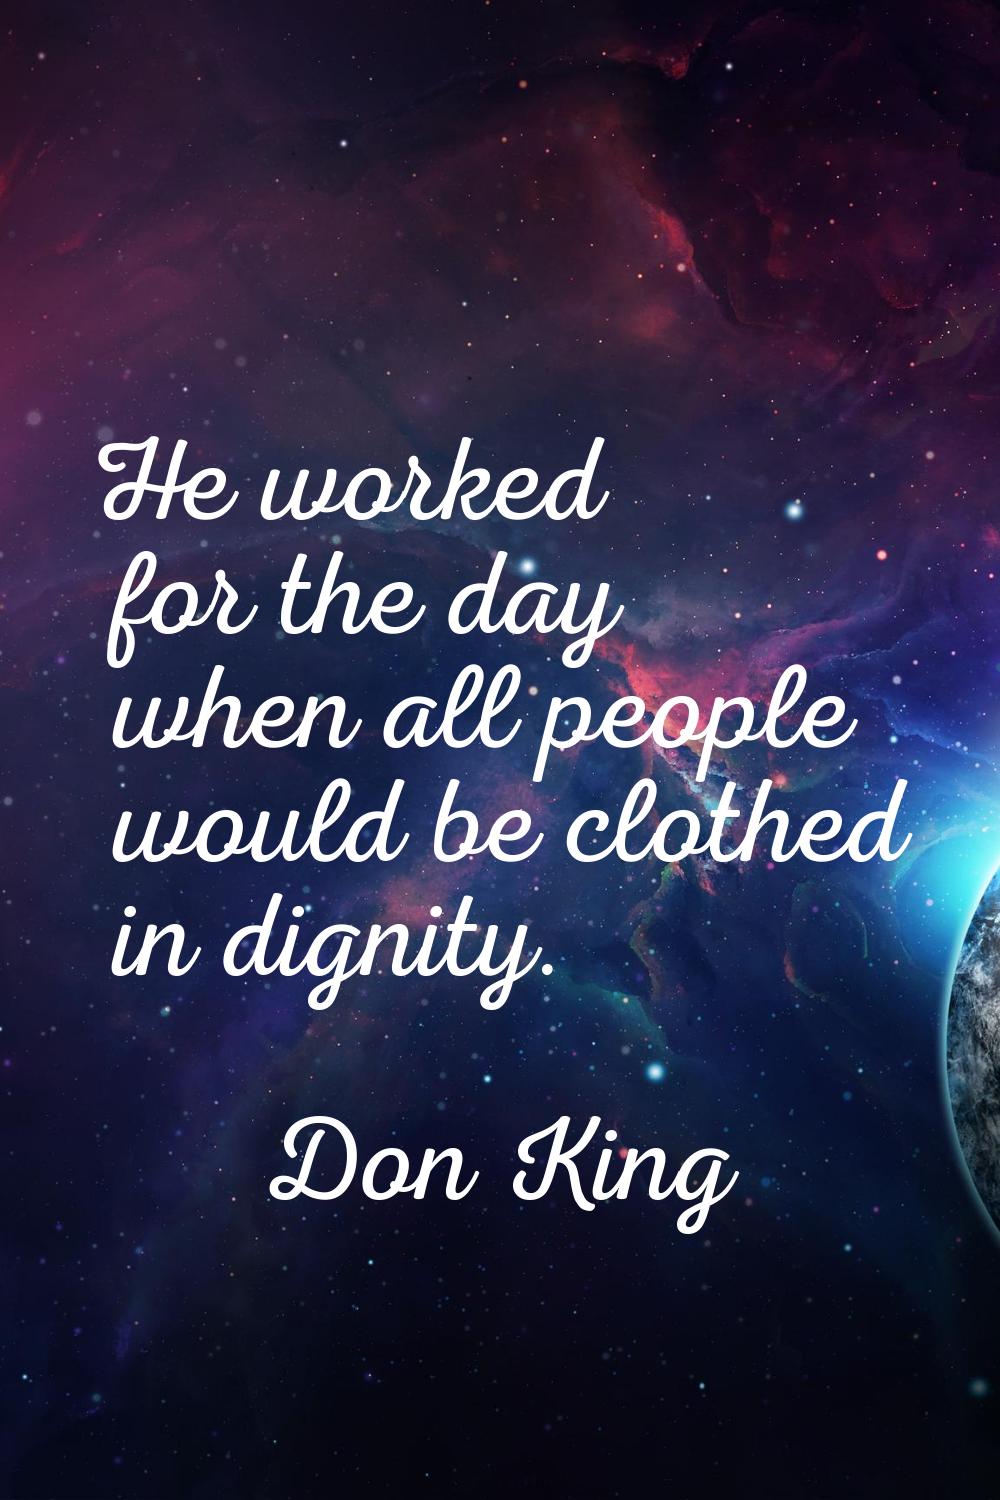 He worked for the day when all people would be clothed in dignity.